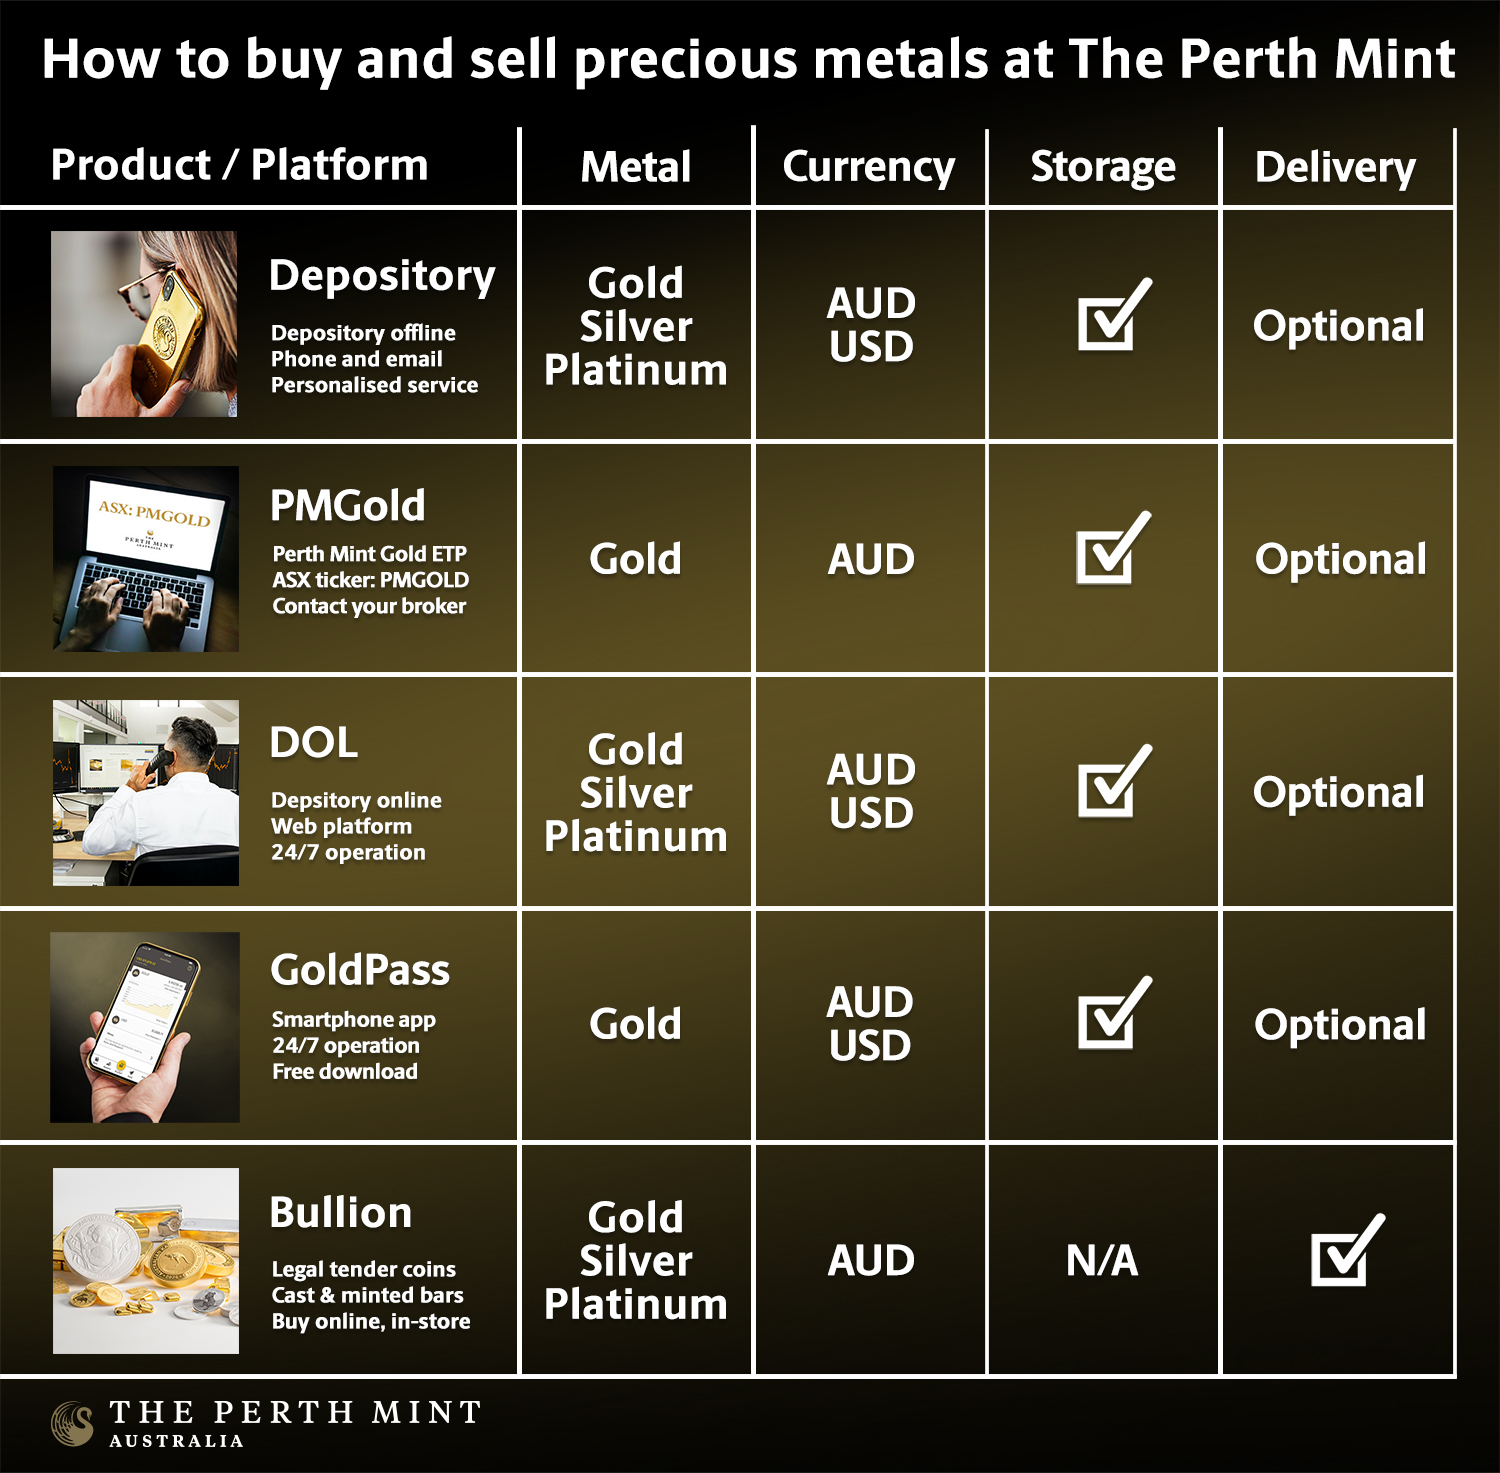 How to buy and sell bullion GRAPHIC